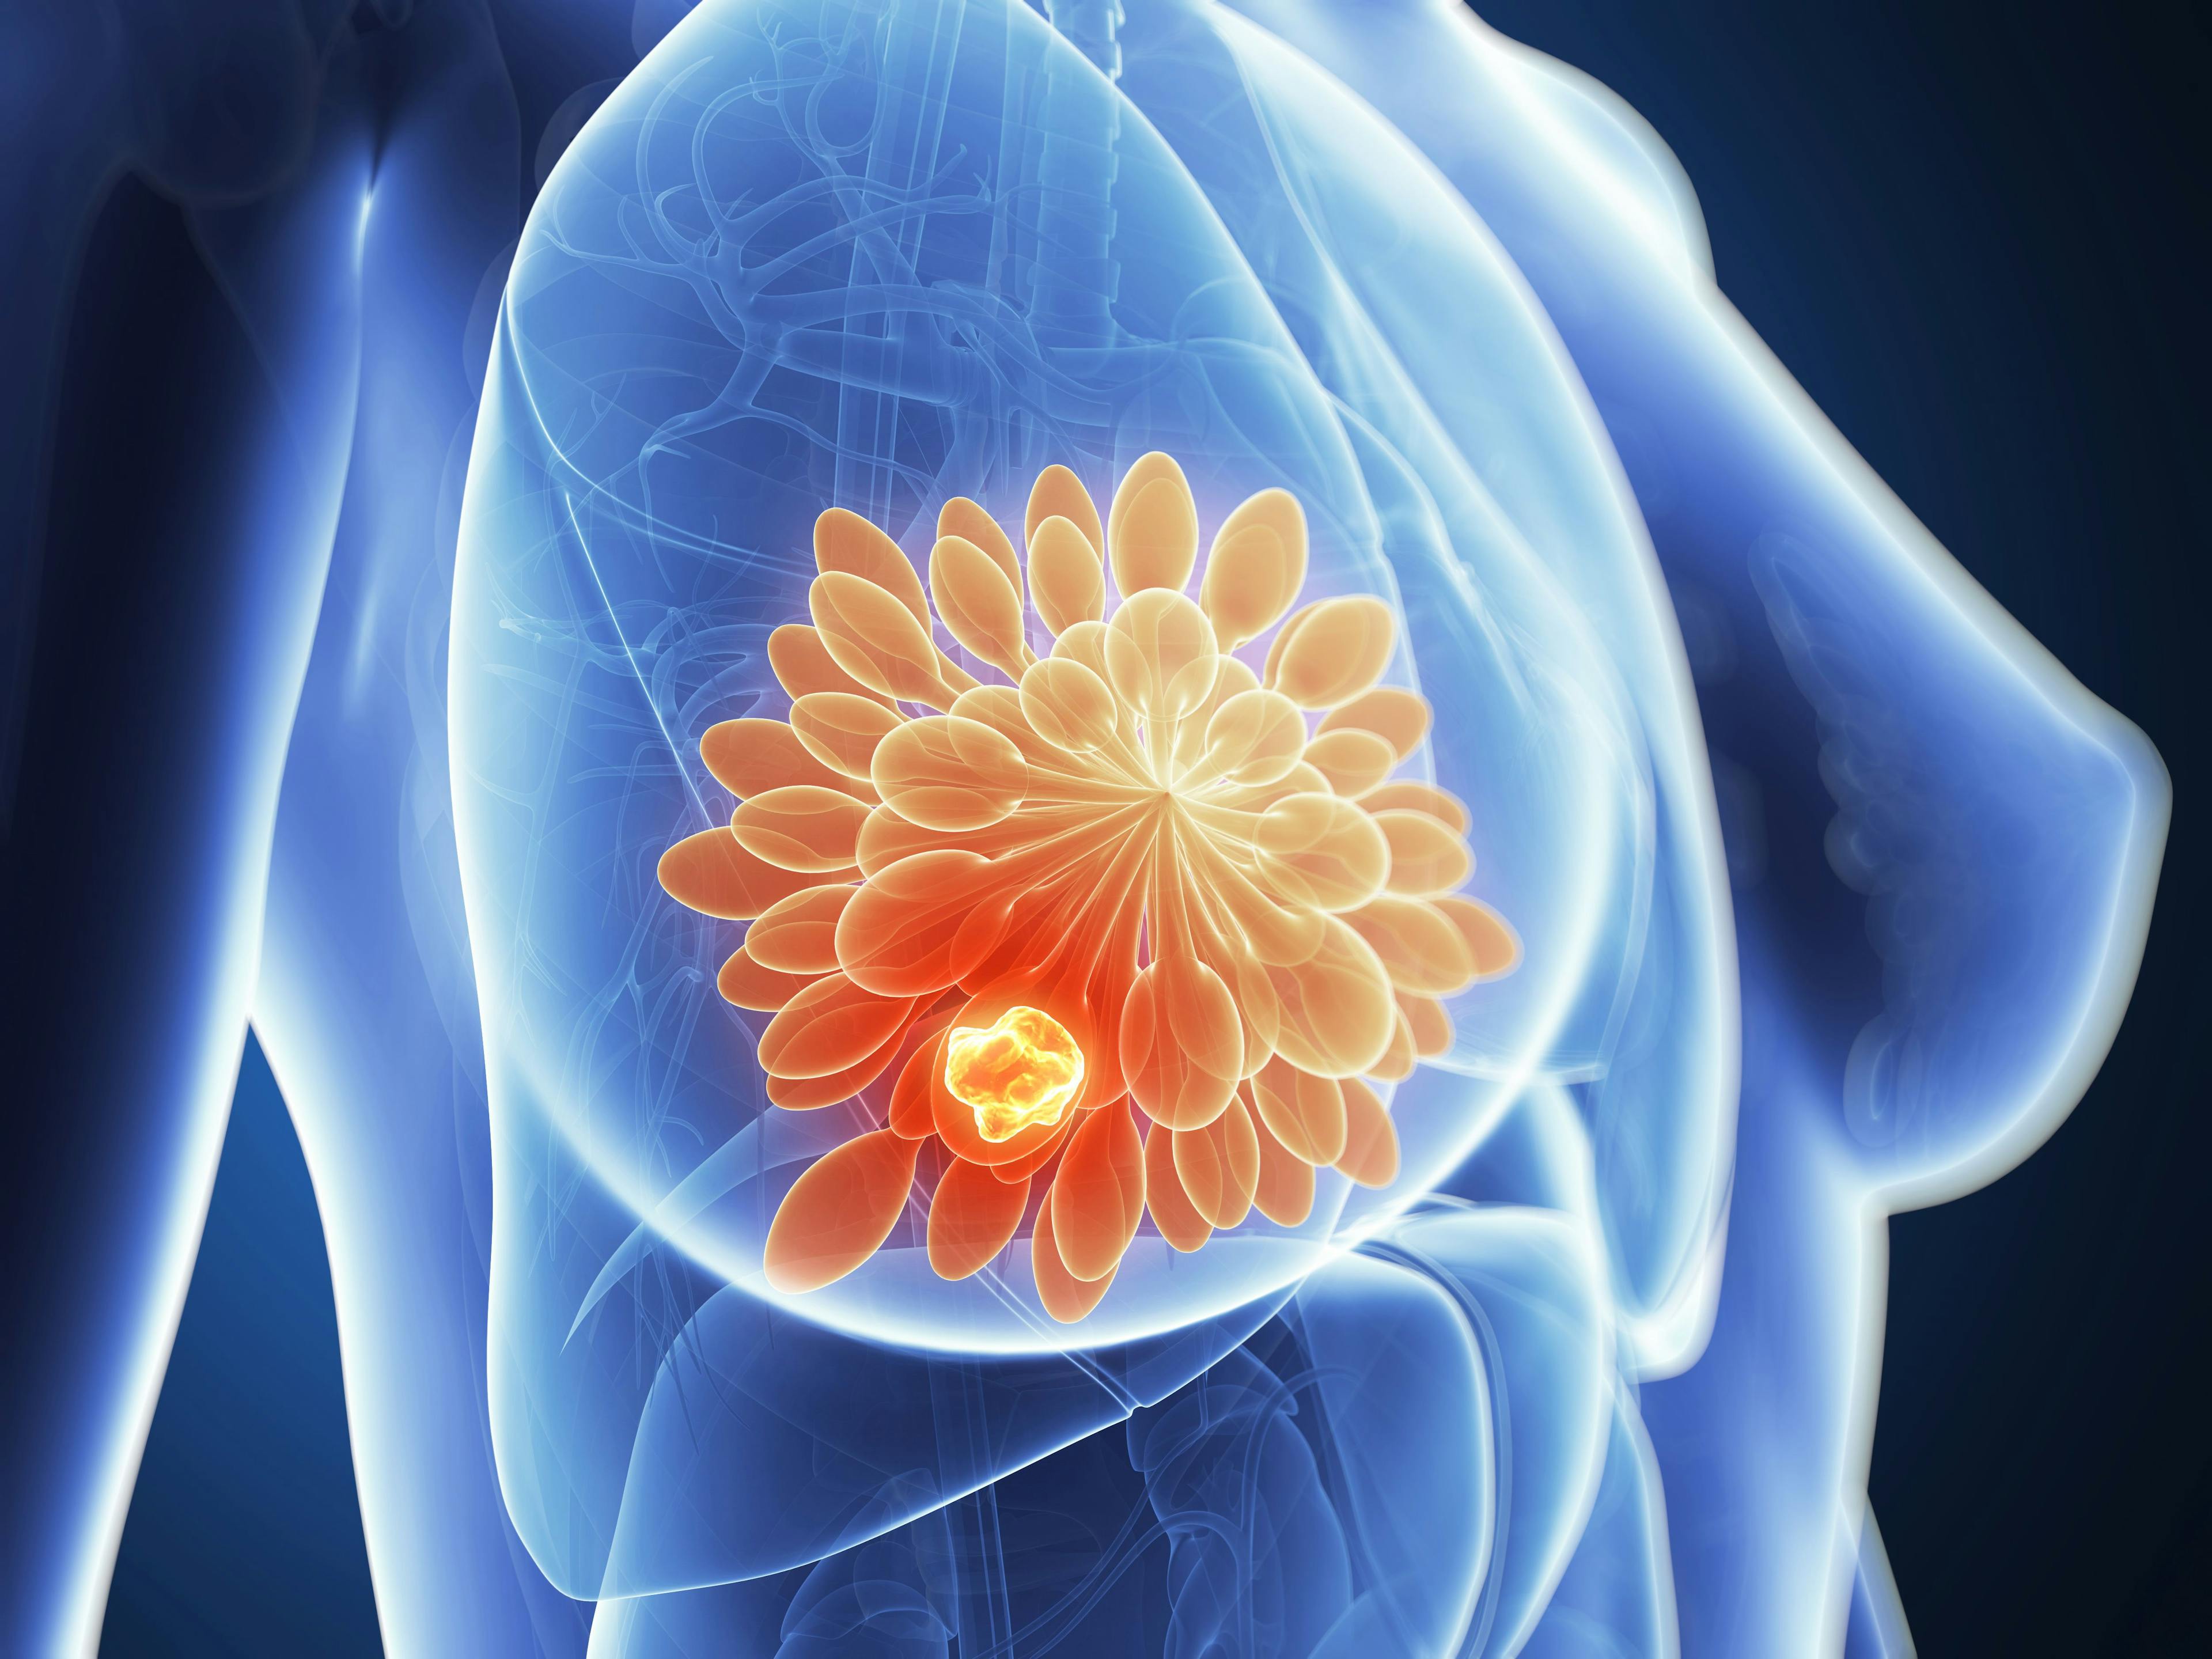 Trastuzumab Deruxtecan Granted Breakthrough Therapy Designation for HER2-Low Metastatic Breast Cancer